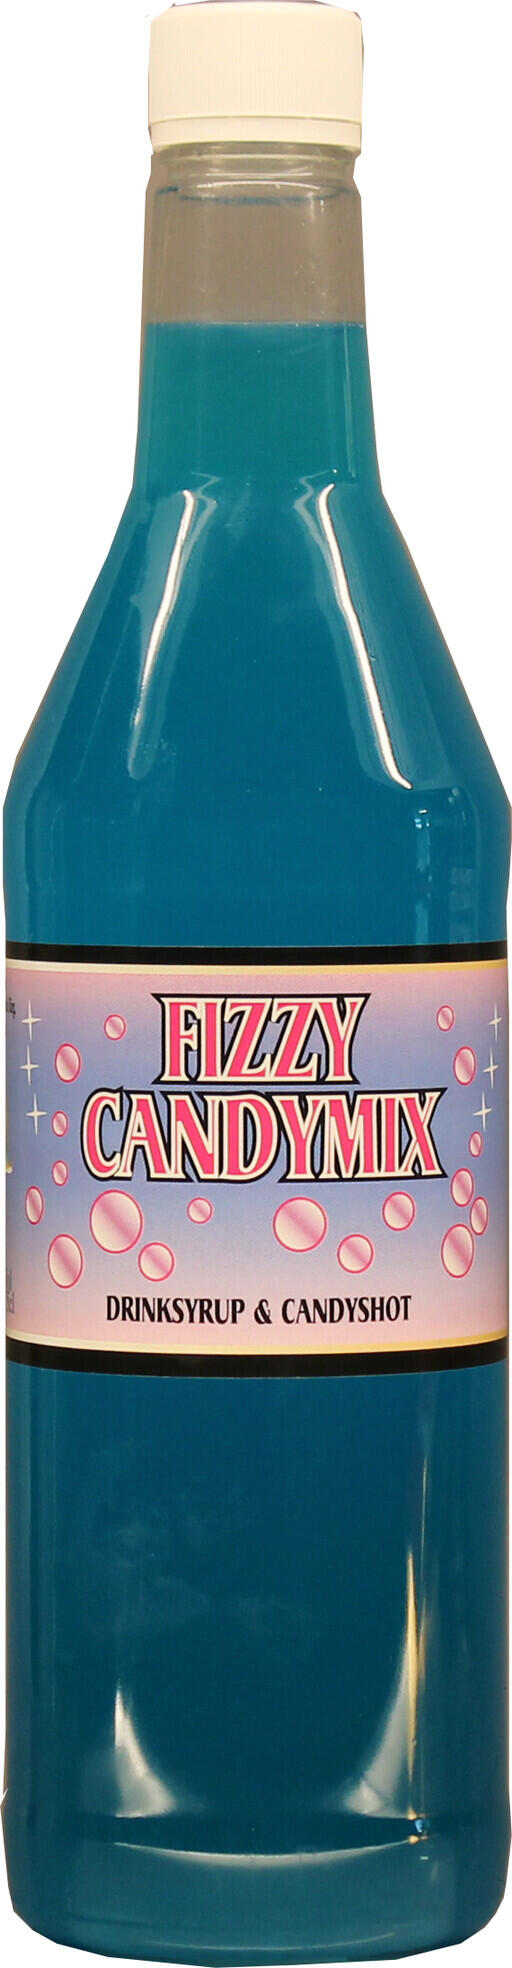 Fizzy Candymix 75cl